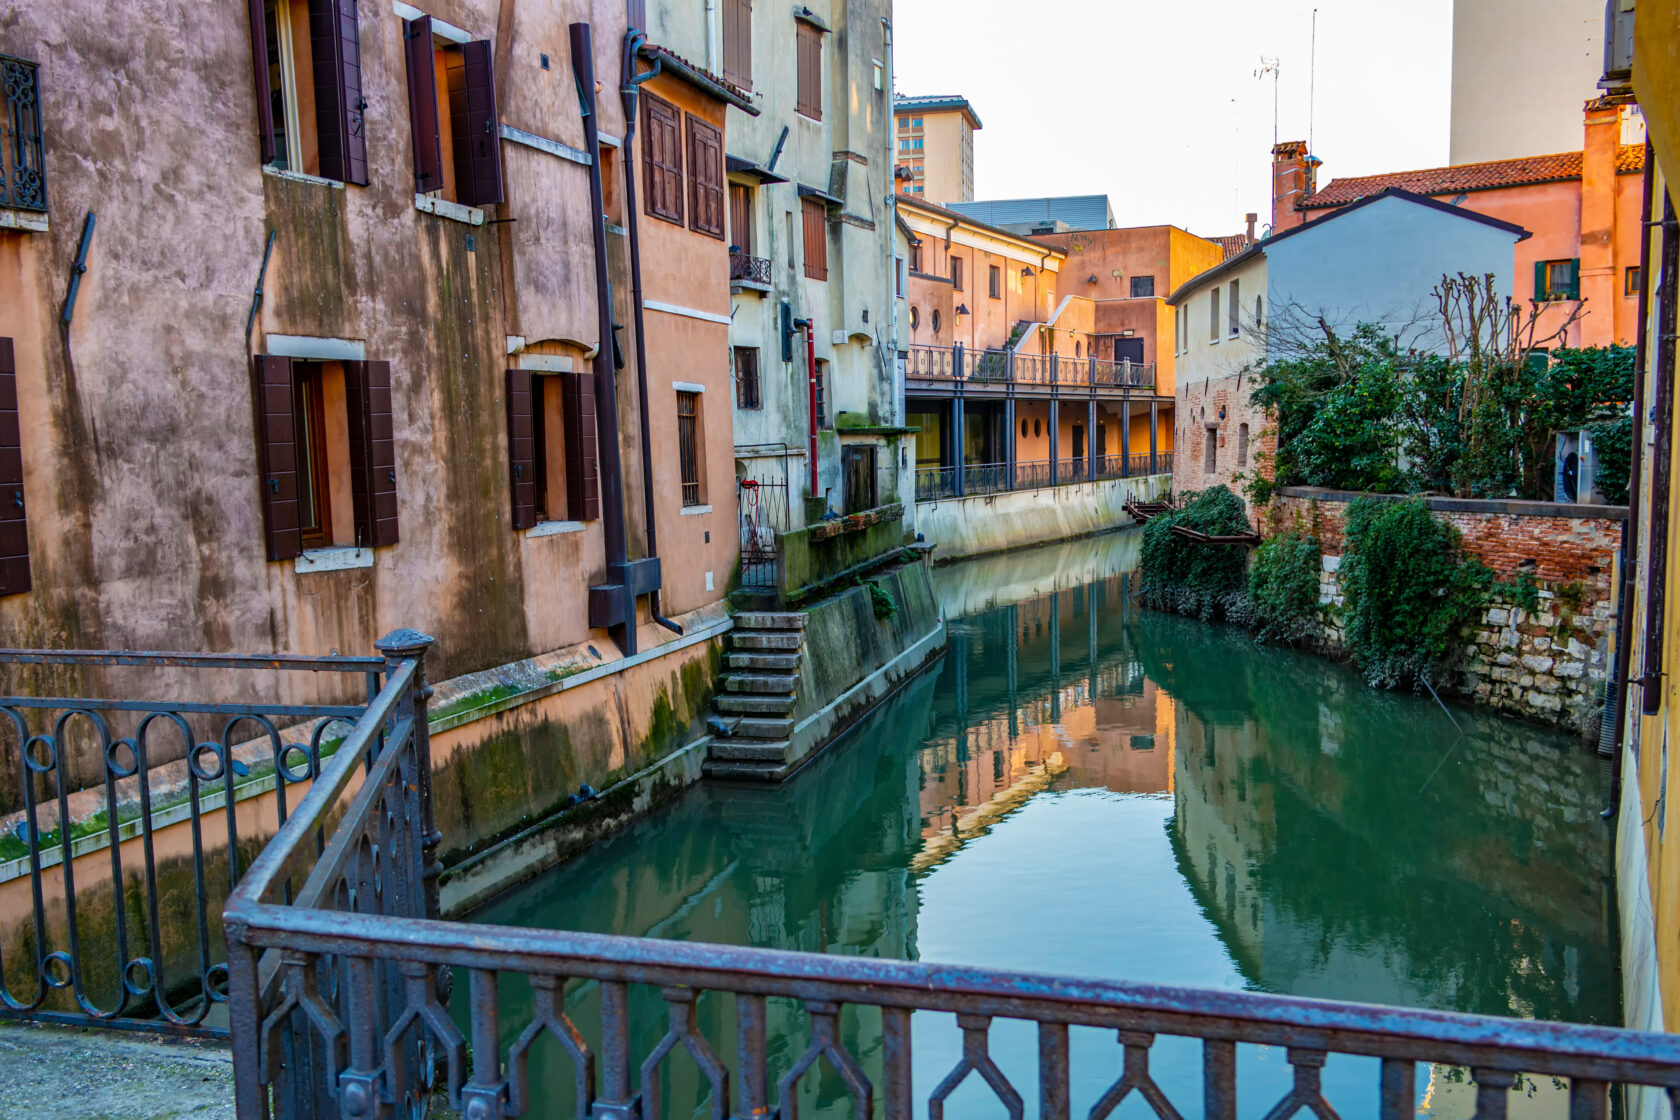 View of a canal in Mestre (Venice) Italy (an Atlantis site).